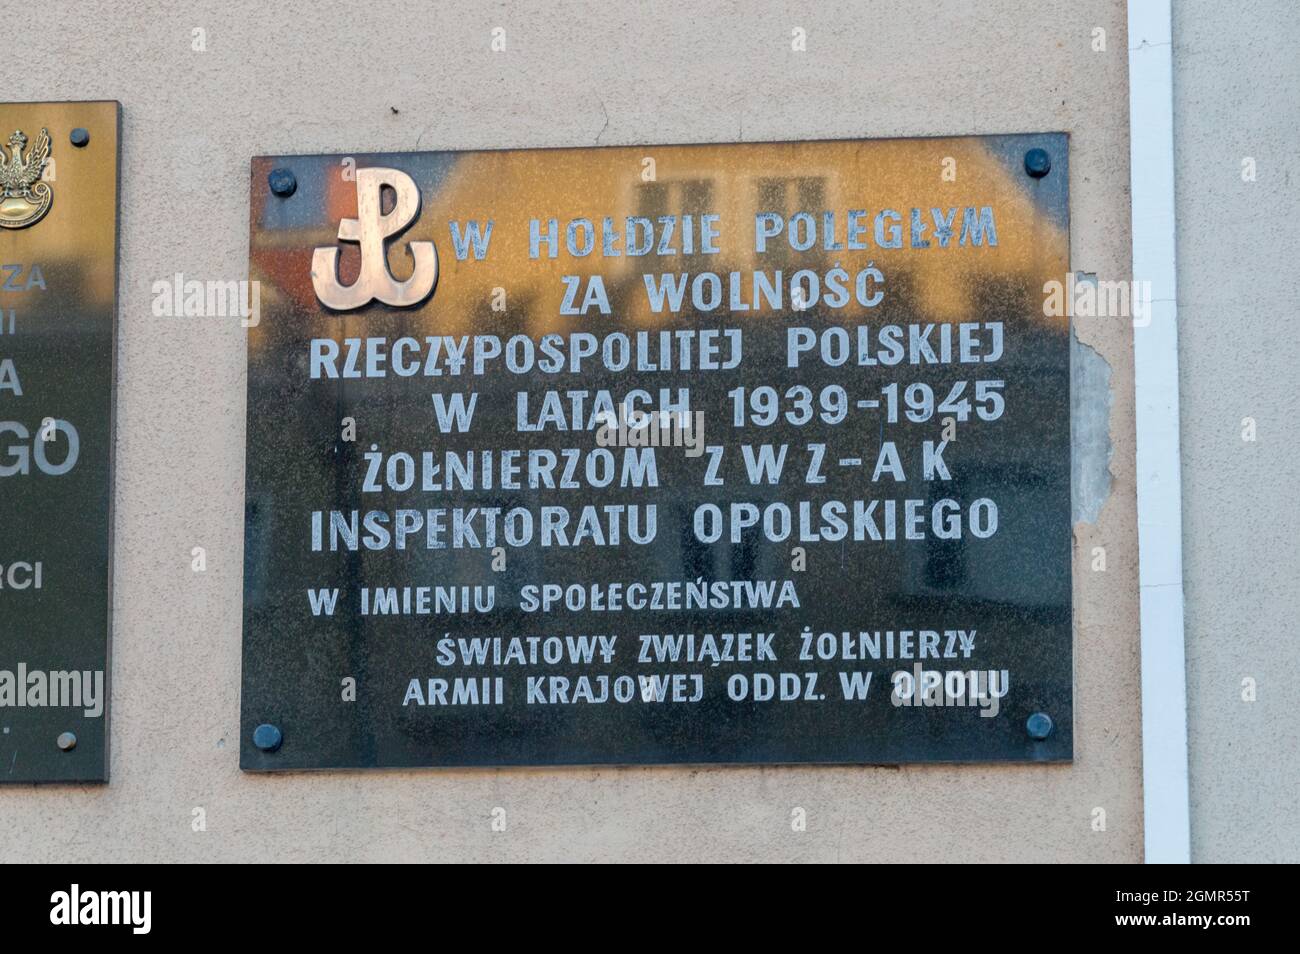 Opole, Poland - June 4, 2021: Plaque in tribute to the soldiers of the Home Army who died for the freedom of the Polish Republic during World War II. Stock Photo